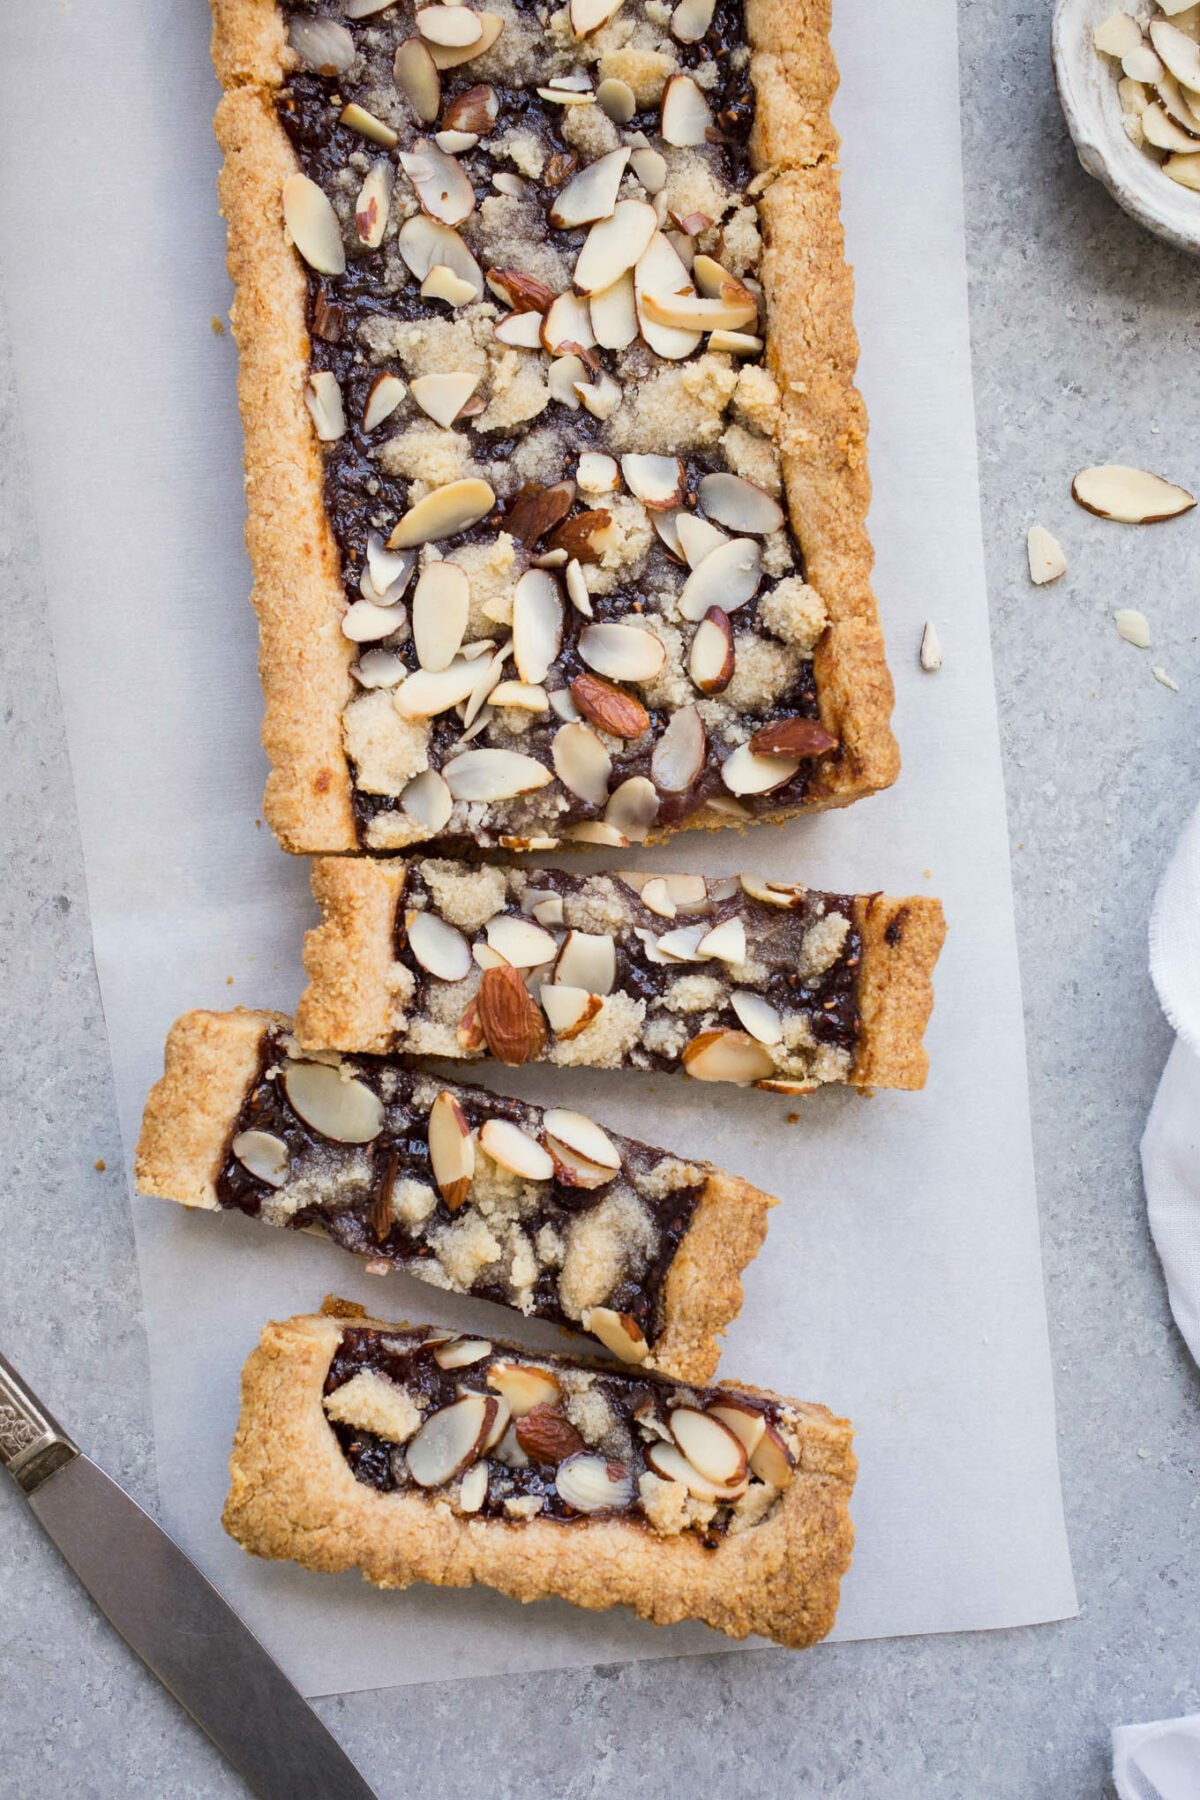 A tart filled with jam and topped with almonds on a piece of parchment paper.